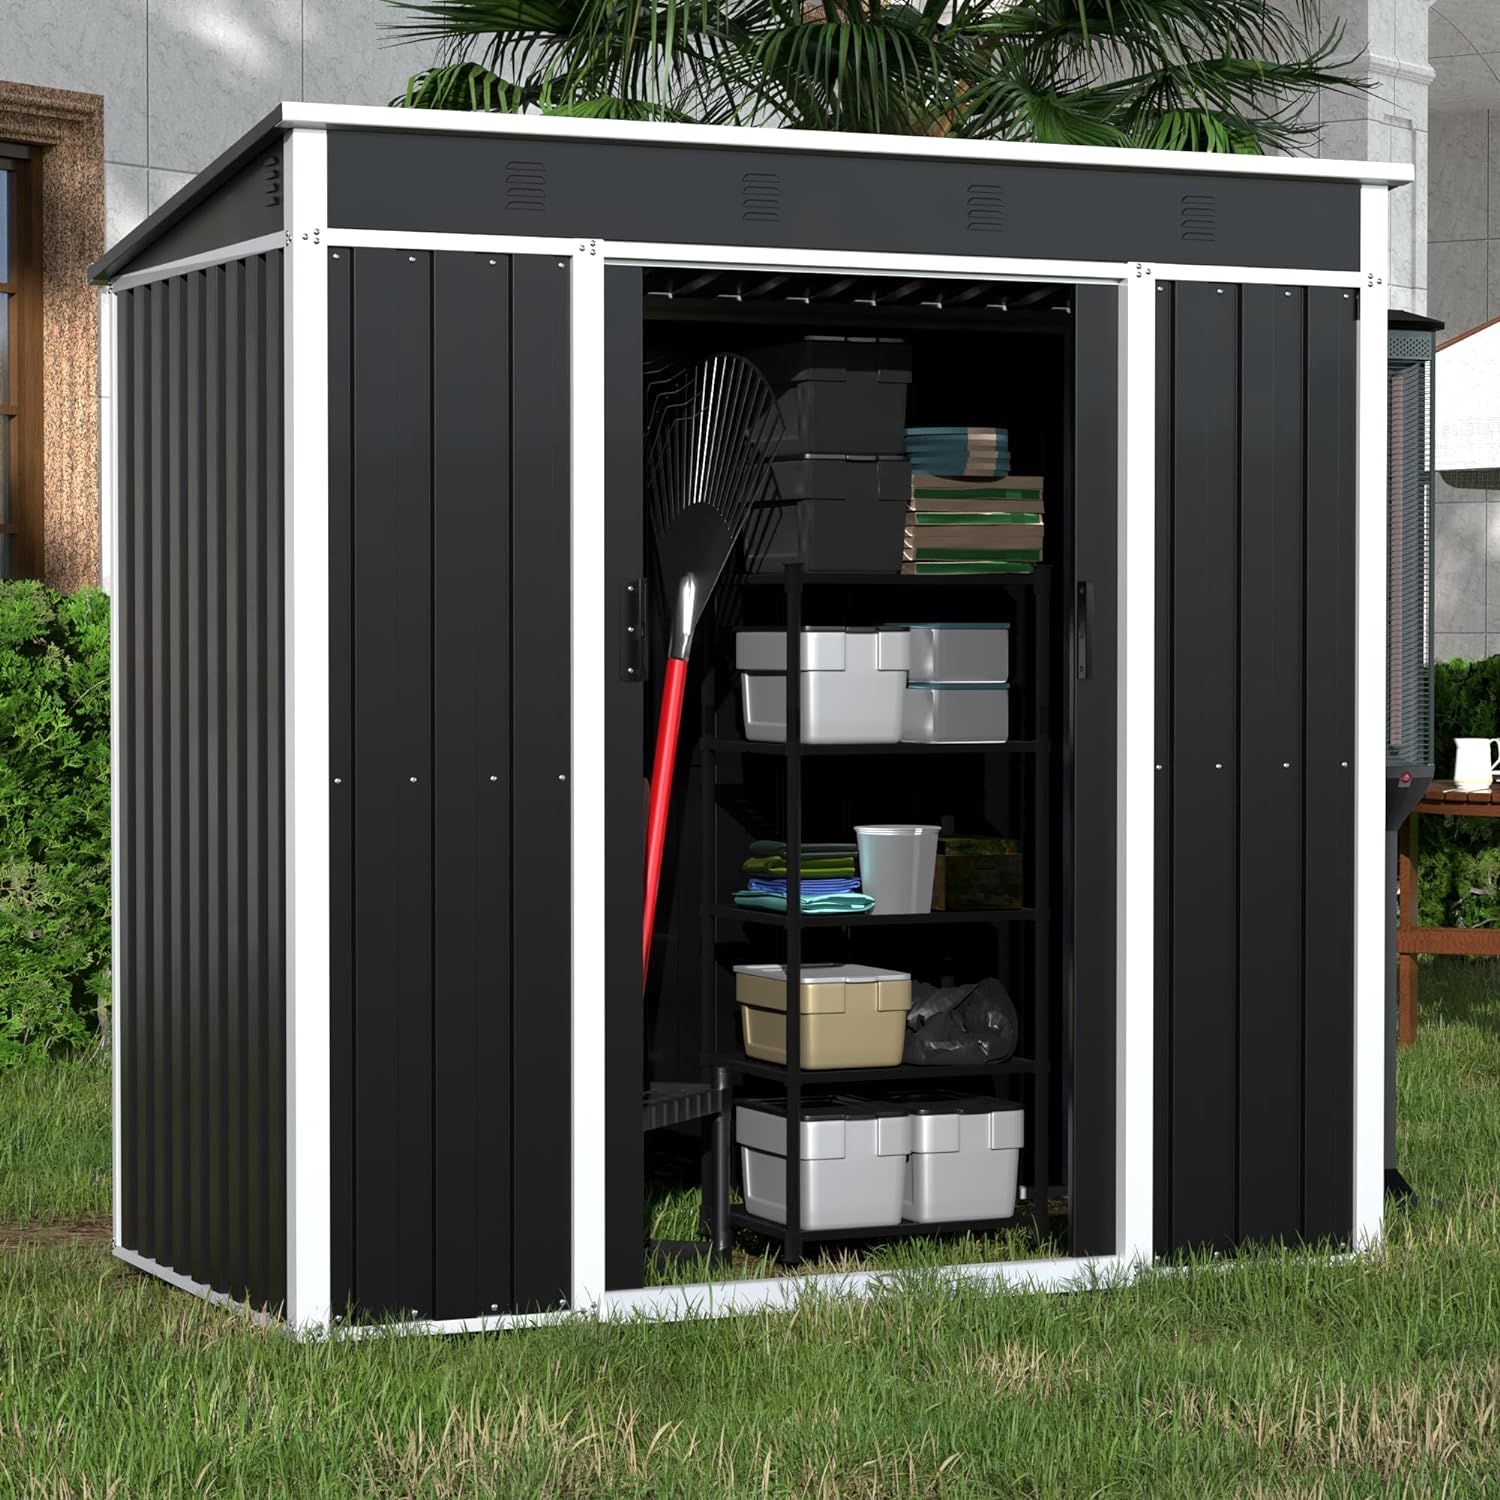 Yizosh Metal Outdoor Storage Shed, 6.3x4.1 FT Steel Utility Tool Shed Storage House with Sliding Door, Metal Sheds Outdoor Storage for Backyard Garden Patio Lawn (H6'xW6'x D4') Black&White